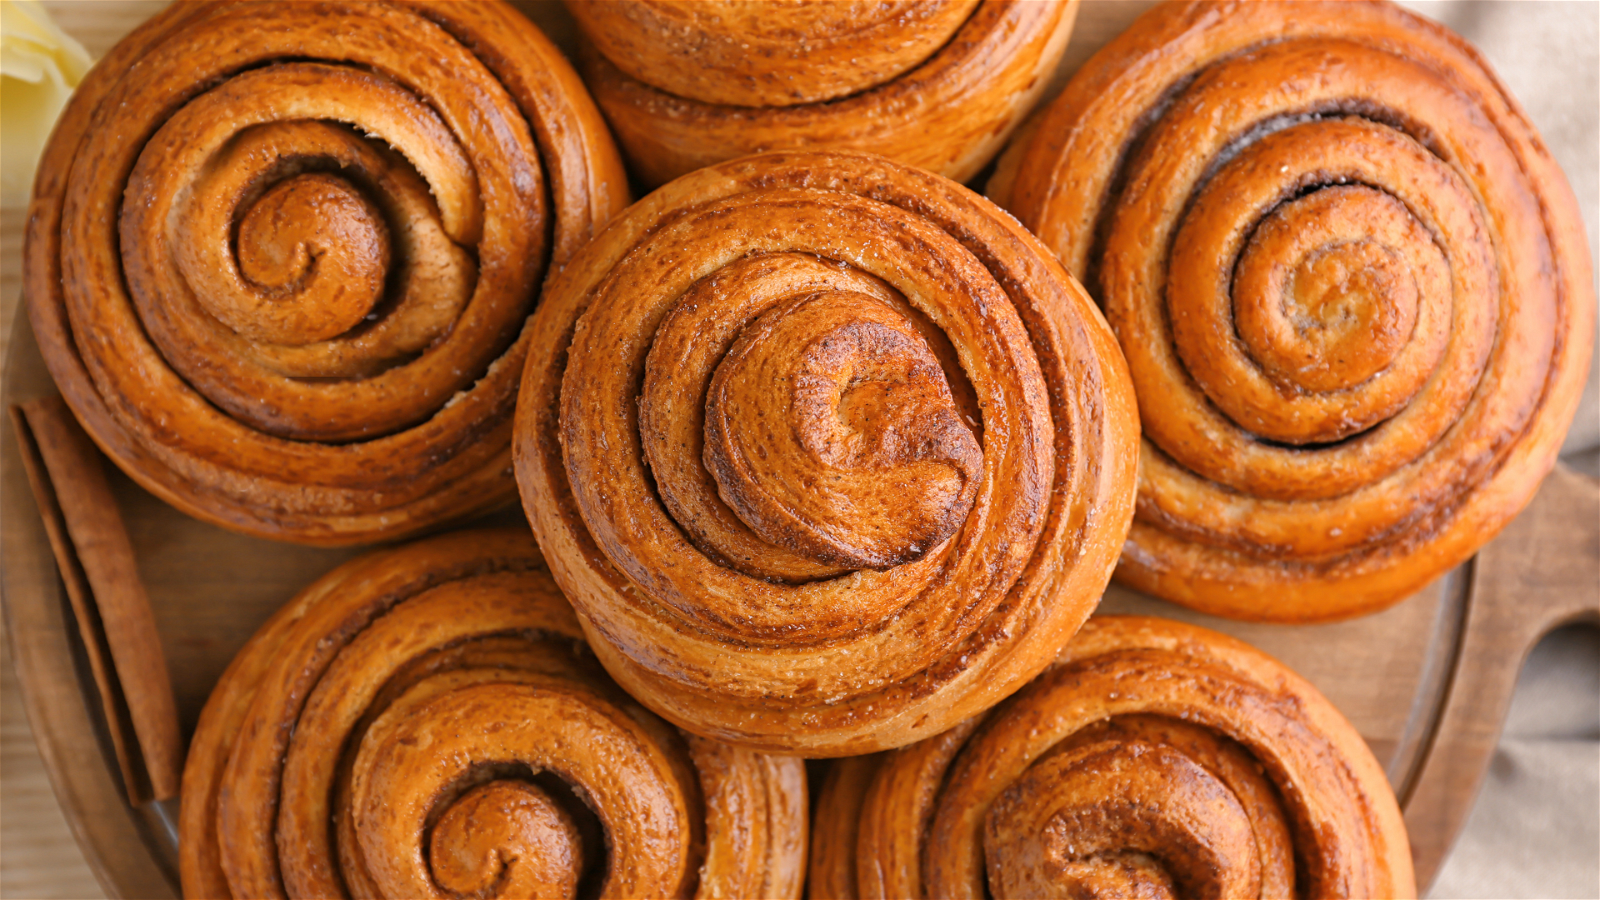 Image of Spiced Cinnamon Rolls with Cream Cheese Frosting